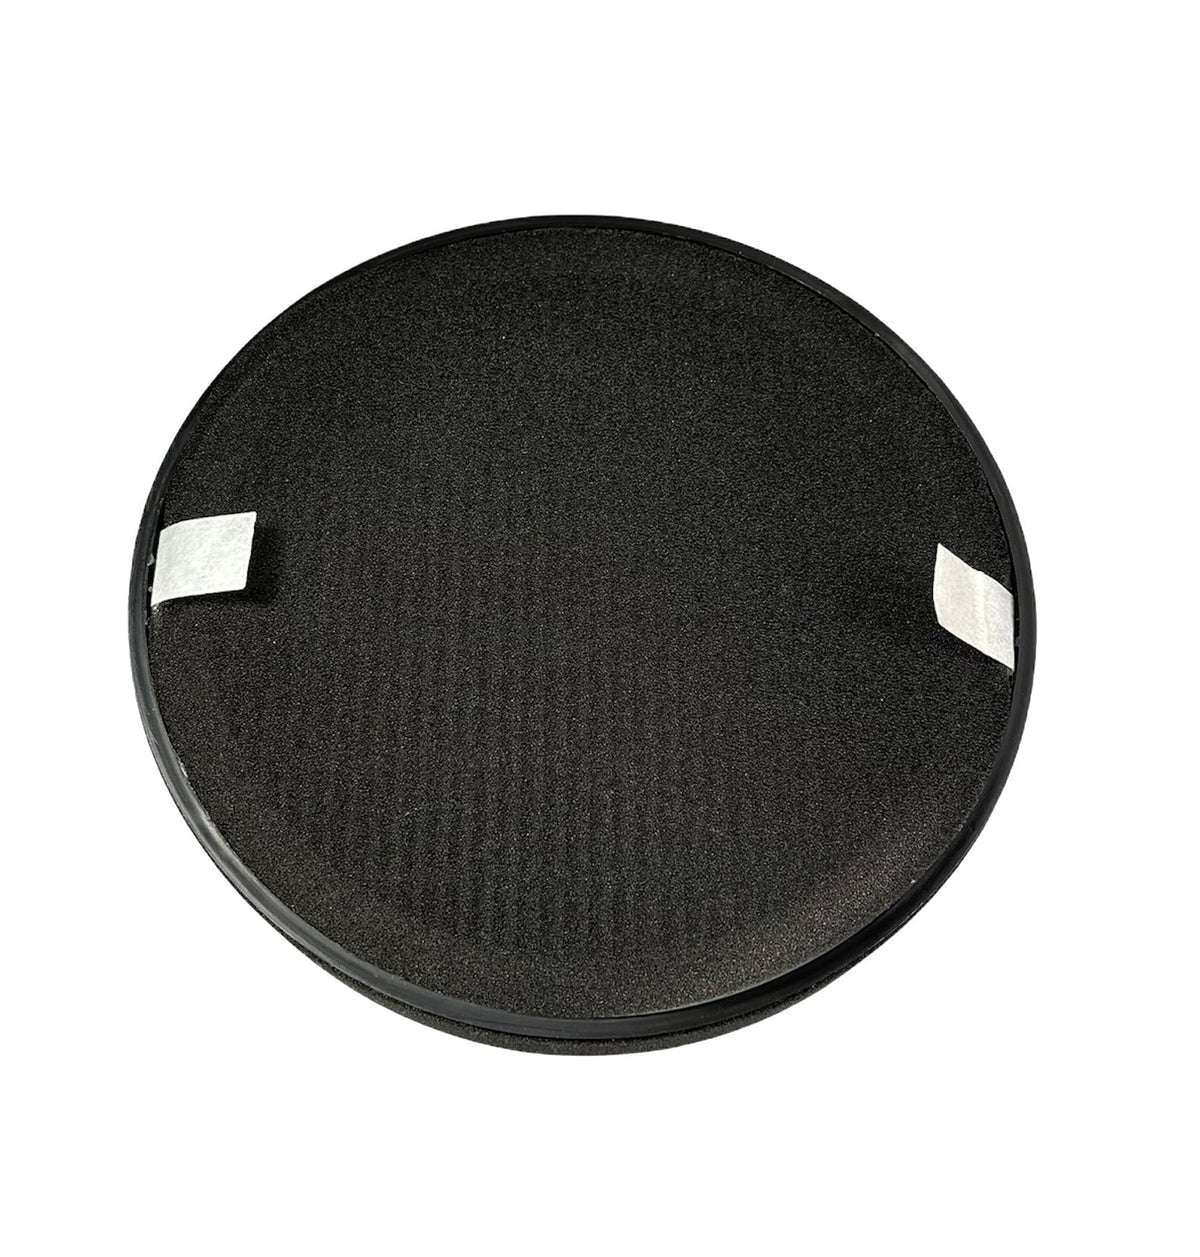 Atomic Compatible Replacement HEPA Filter for Levoit LV-H132-RF (2 Pac -  Atomic Filters